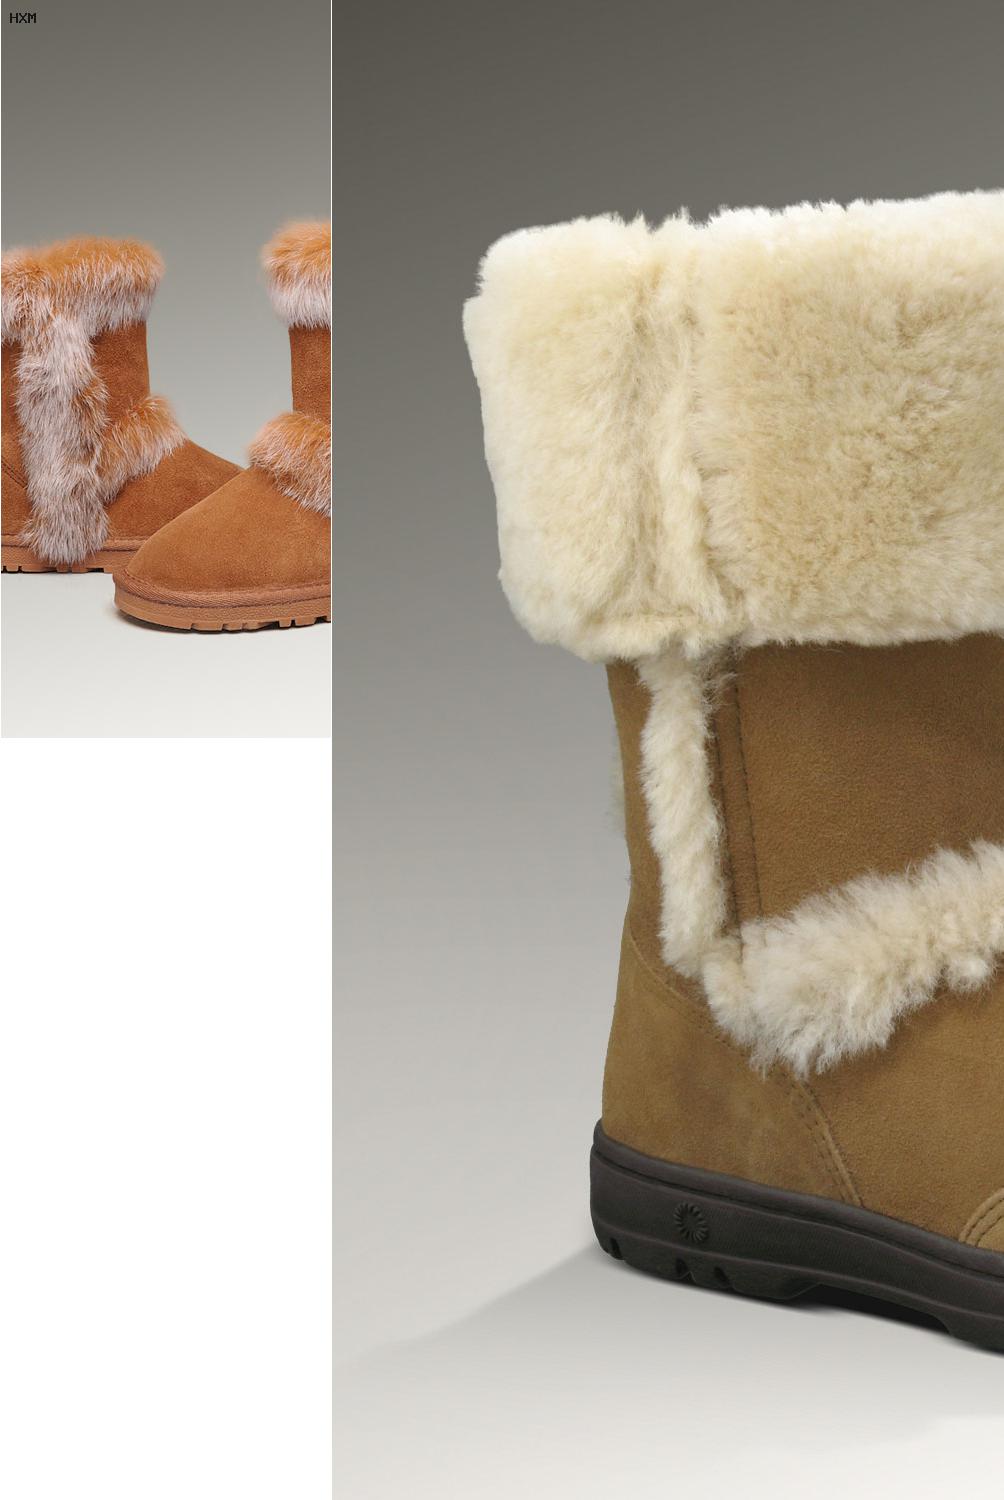 ugg boots for 40 dollars